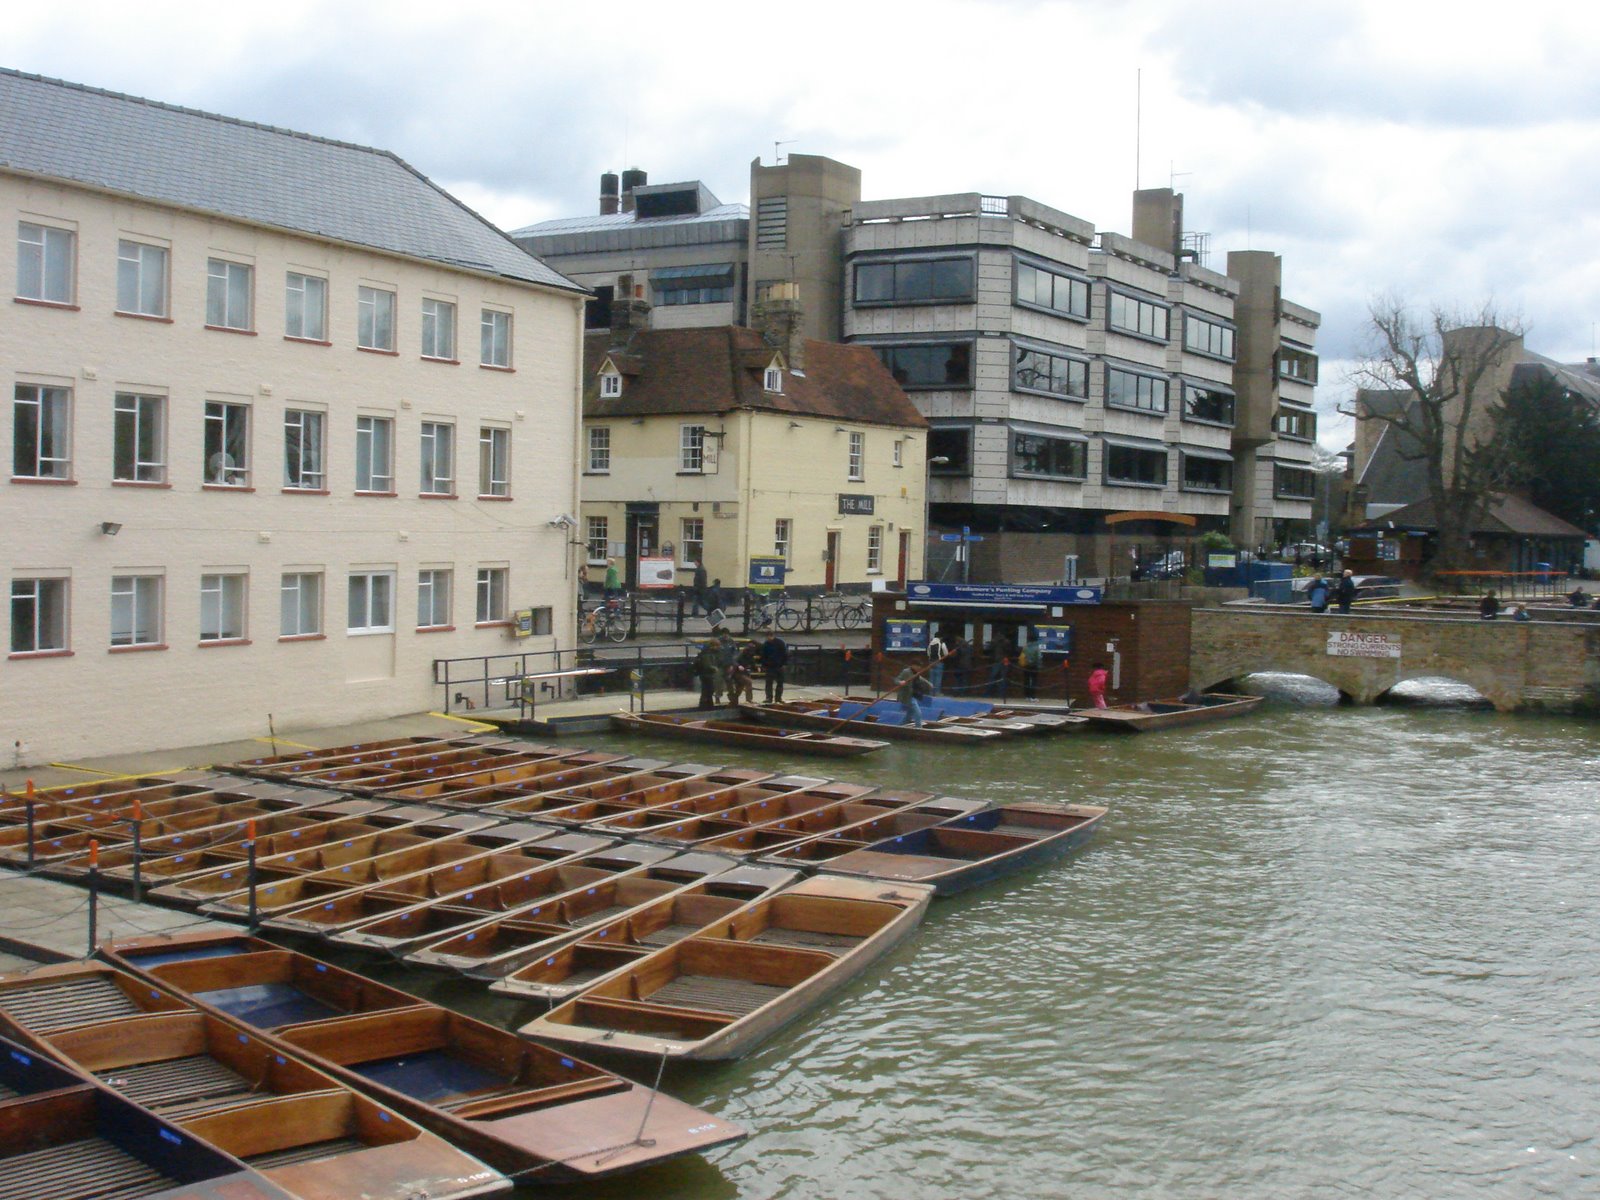 Punting boats on River Cam